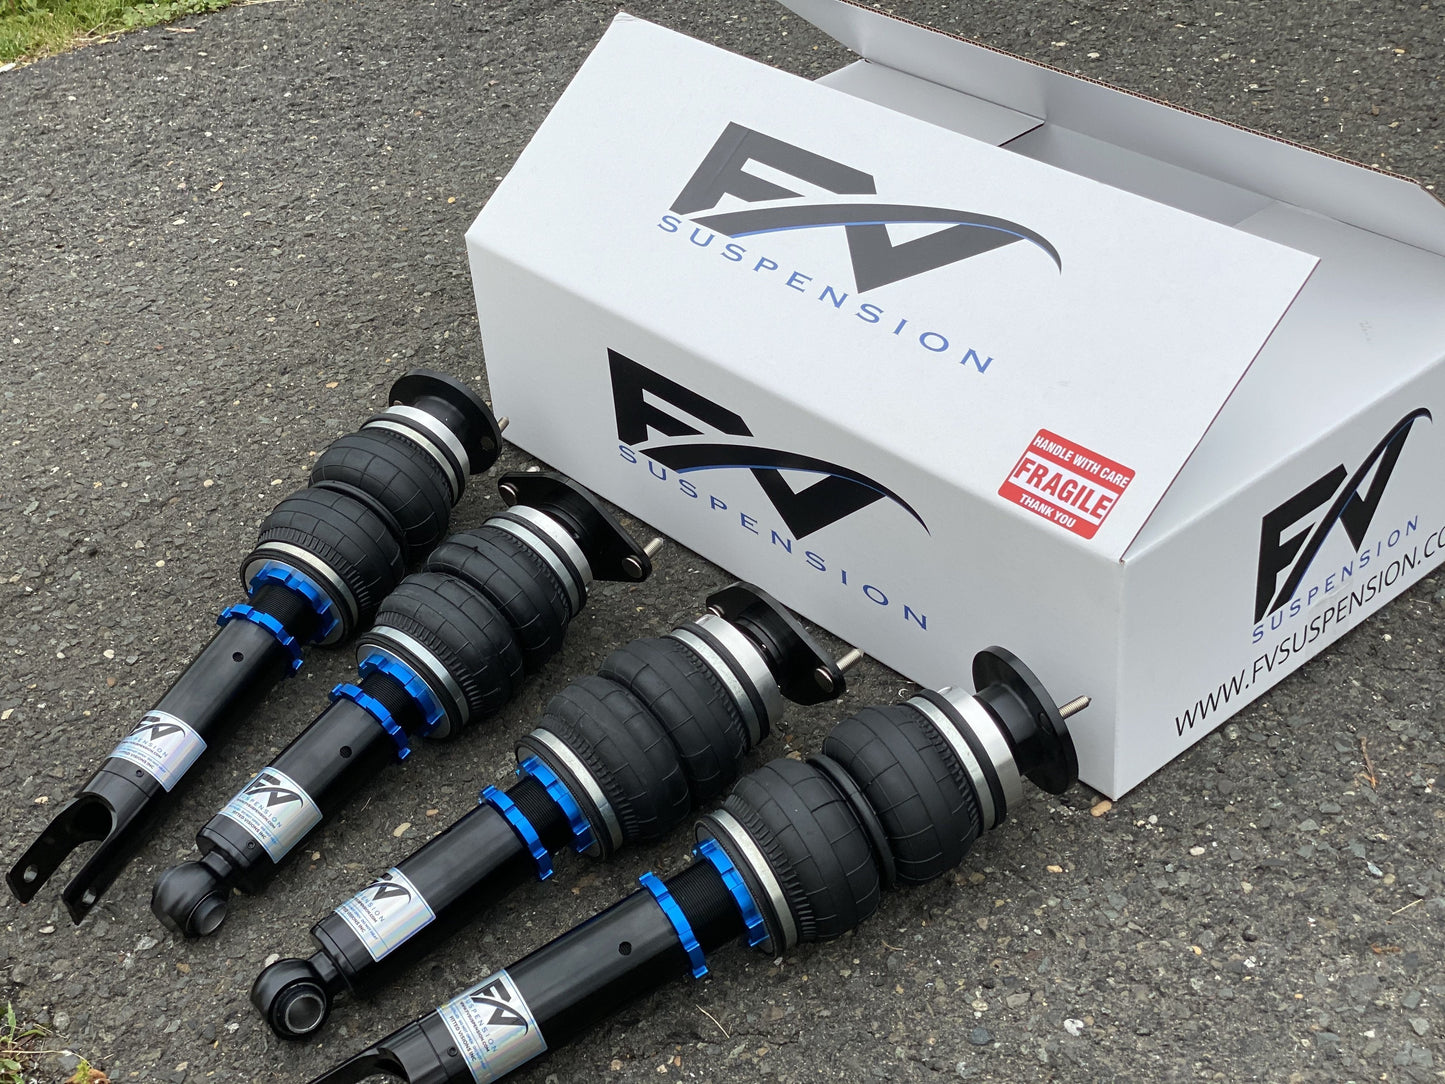 FV Suspension Tier 1 Budget kit Complete Air Ride kit for 14-24 BMW 2 Series F22 - Full Kits